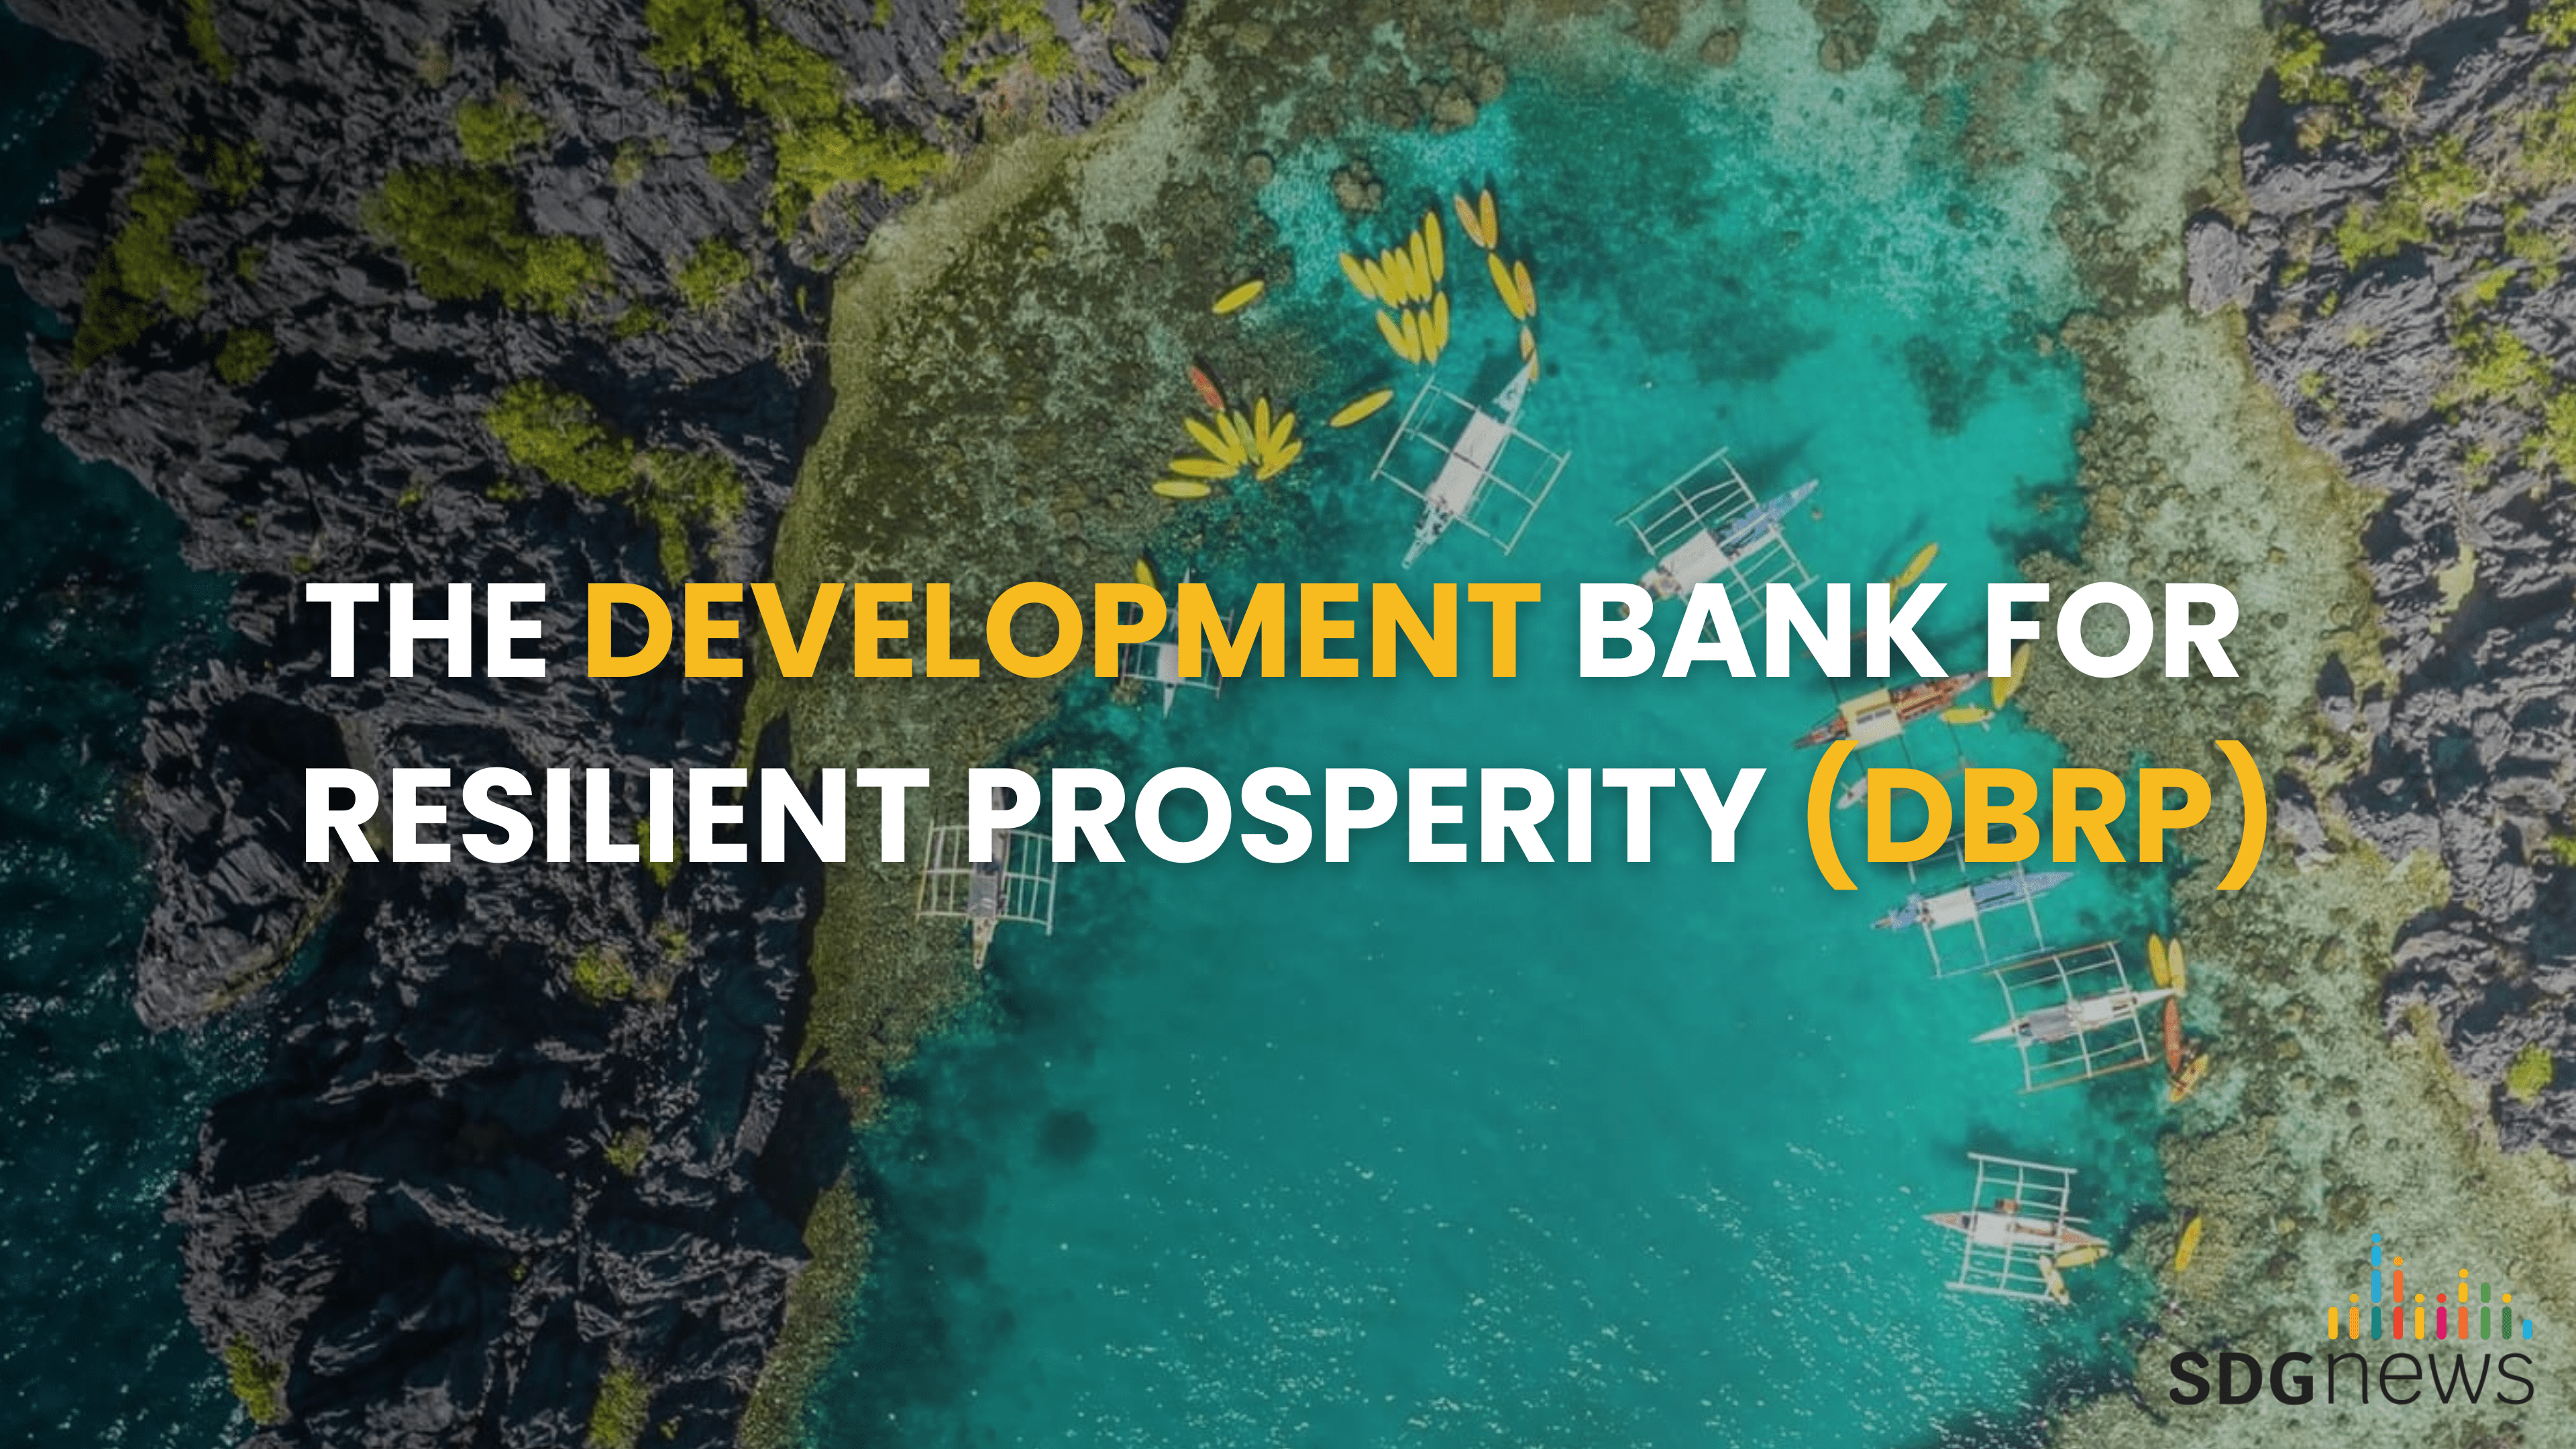 THE DEVELOPMENT BANK FOR RESILIENT PROSPERITY (DBRP)